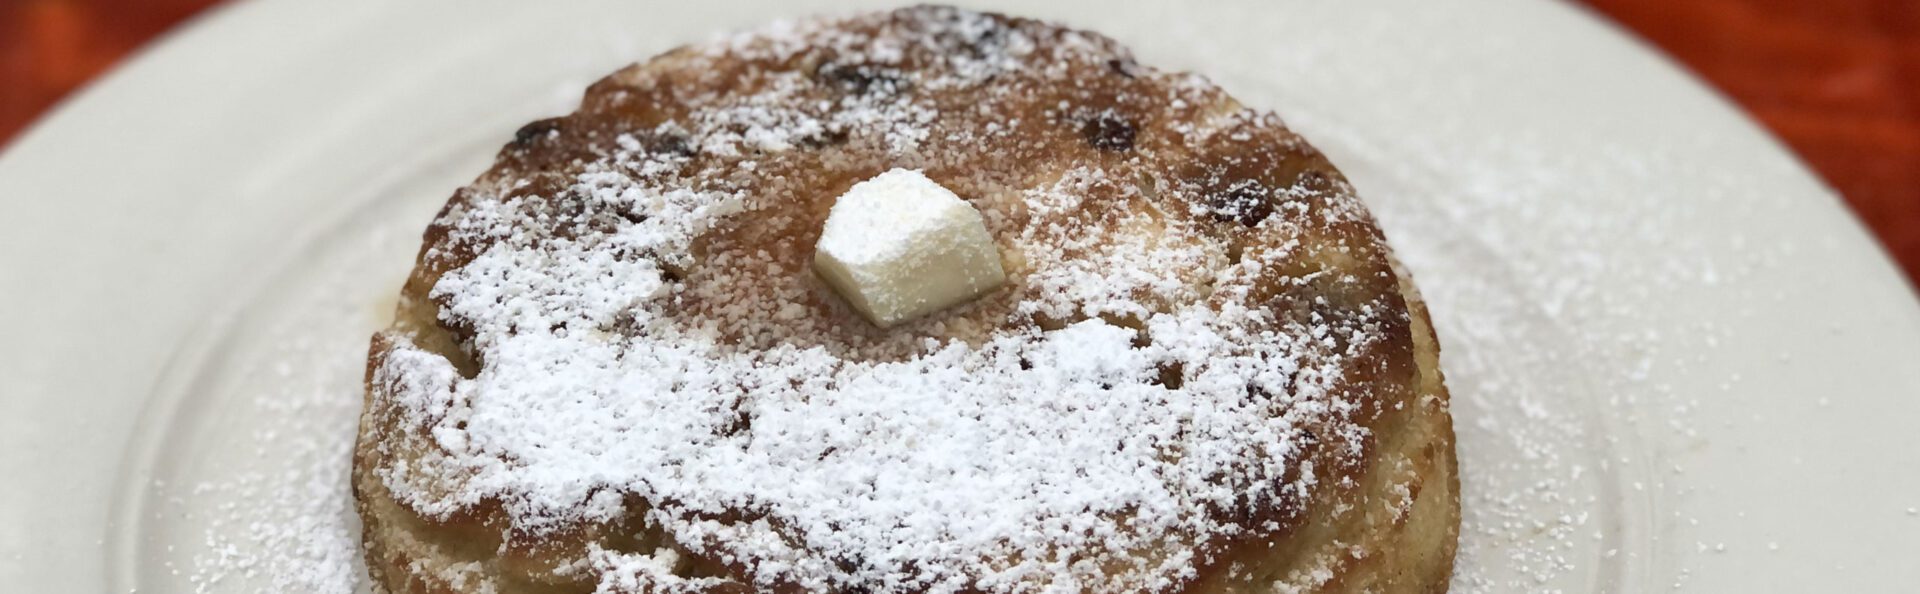 A close up of powdered sugar on top of a cake.